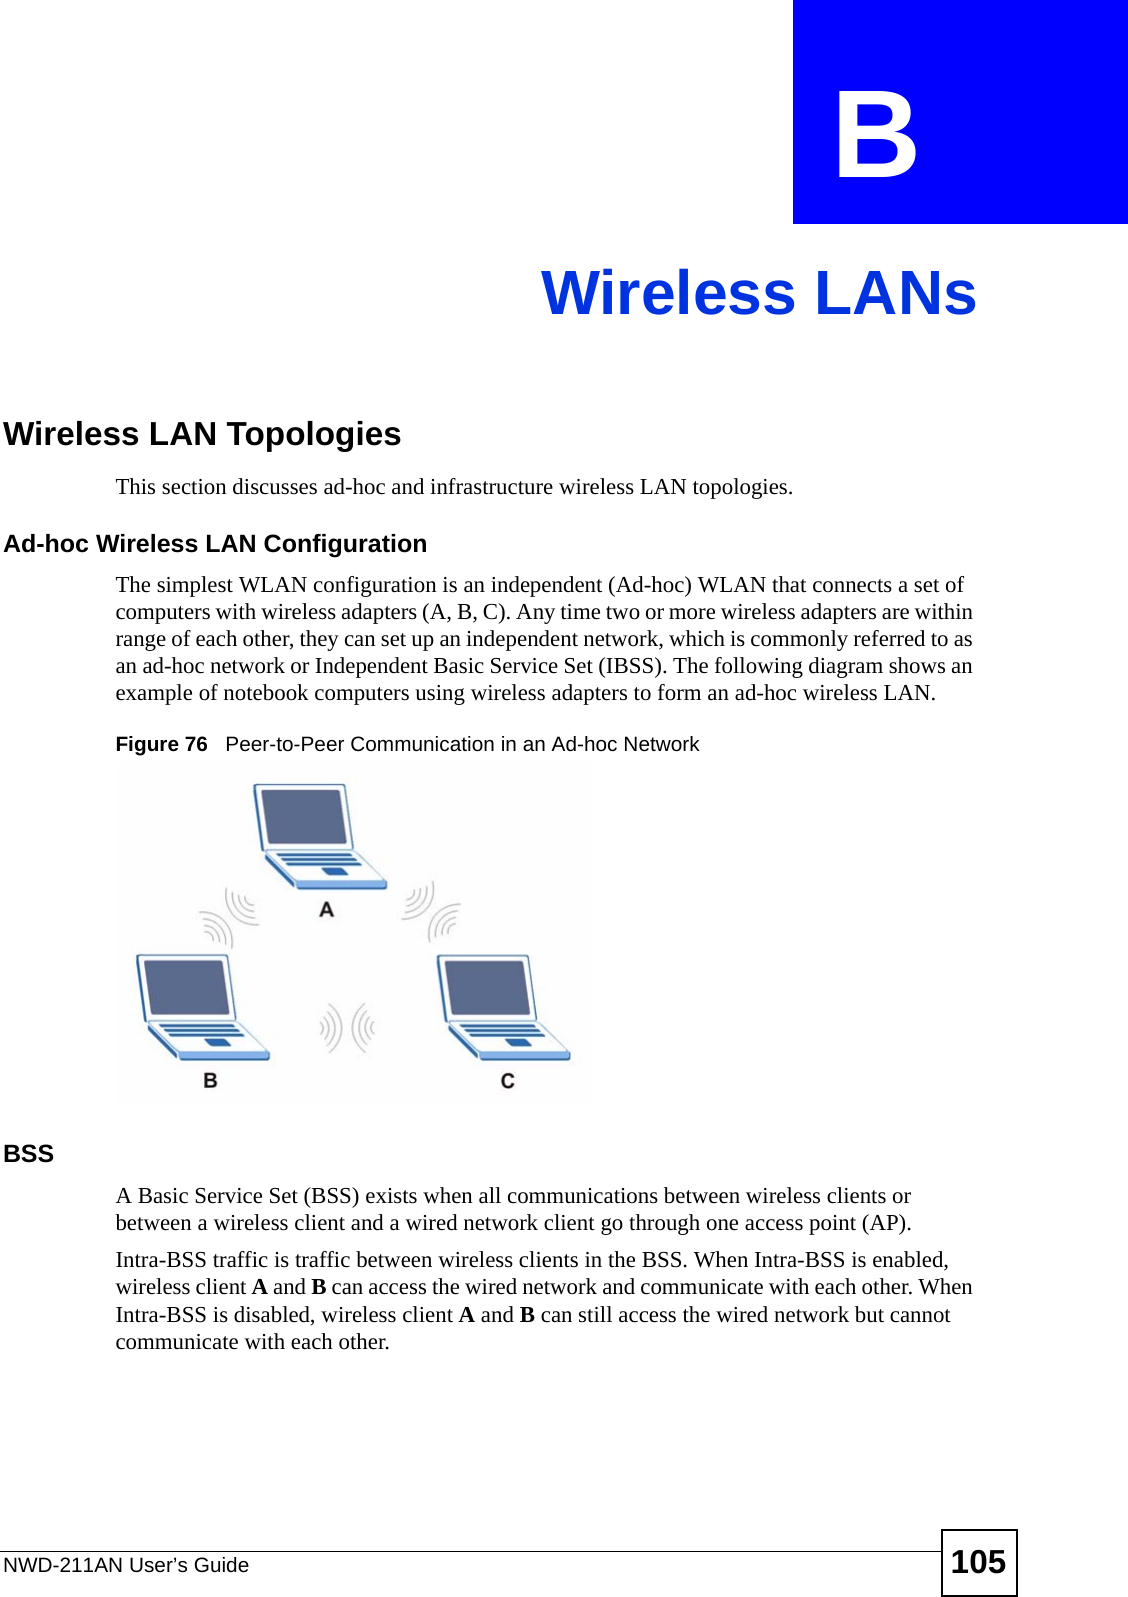 NWD-211AN User’s Guide 105APPENDIX  B Wireless LANsWireless LAN TopologiesThis section discusses ad-hoc and infrastructure wireless LAN topologies.Ad-hoc Wireless LAN ConfigurationThe simplest WLAN configuration is an independent (Ad-hoc) WLAN that connects a set of computers with wireless adapters (A, B, C). Any time two or more wireless adapters are within range of each other, they can set up an independent network, which is commonly referred to as an ad-hoc network or Independent Basic Service Set (IBSS). The following diagram shows an example of notebook computers using wireless adapters to form an ad-hoc wireless LAN. Figure 76   Peer-to-Peer Communication in an Ad-hoc NetworkBSSA Basic Service Set (BSS) exists when all communications between wireless clients or between a wireless client and a wired network client go through one access point (AP). Intra-BSS traffic is traffic between wireless clients in the BSS. When Intra-BSS is enabled, wireless client A and B can access the wired network and communicate with each other. When Intra-BSS is disabled, wireless client A and B can still access the wired network but cannot communicate with each other.